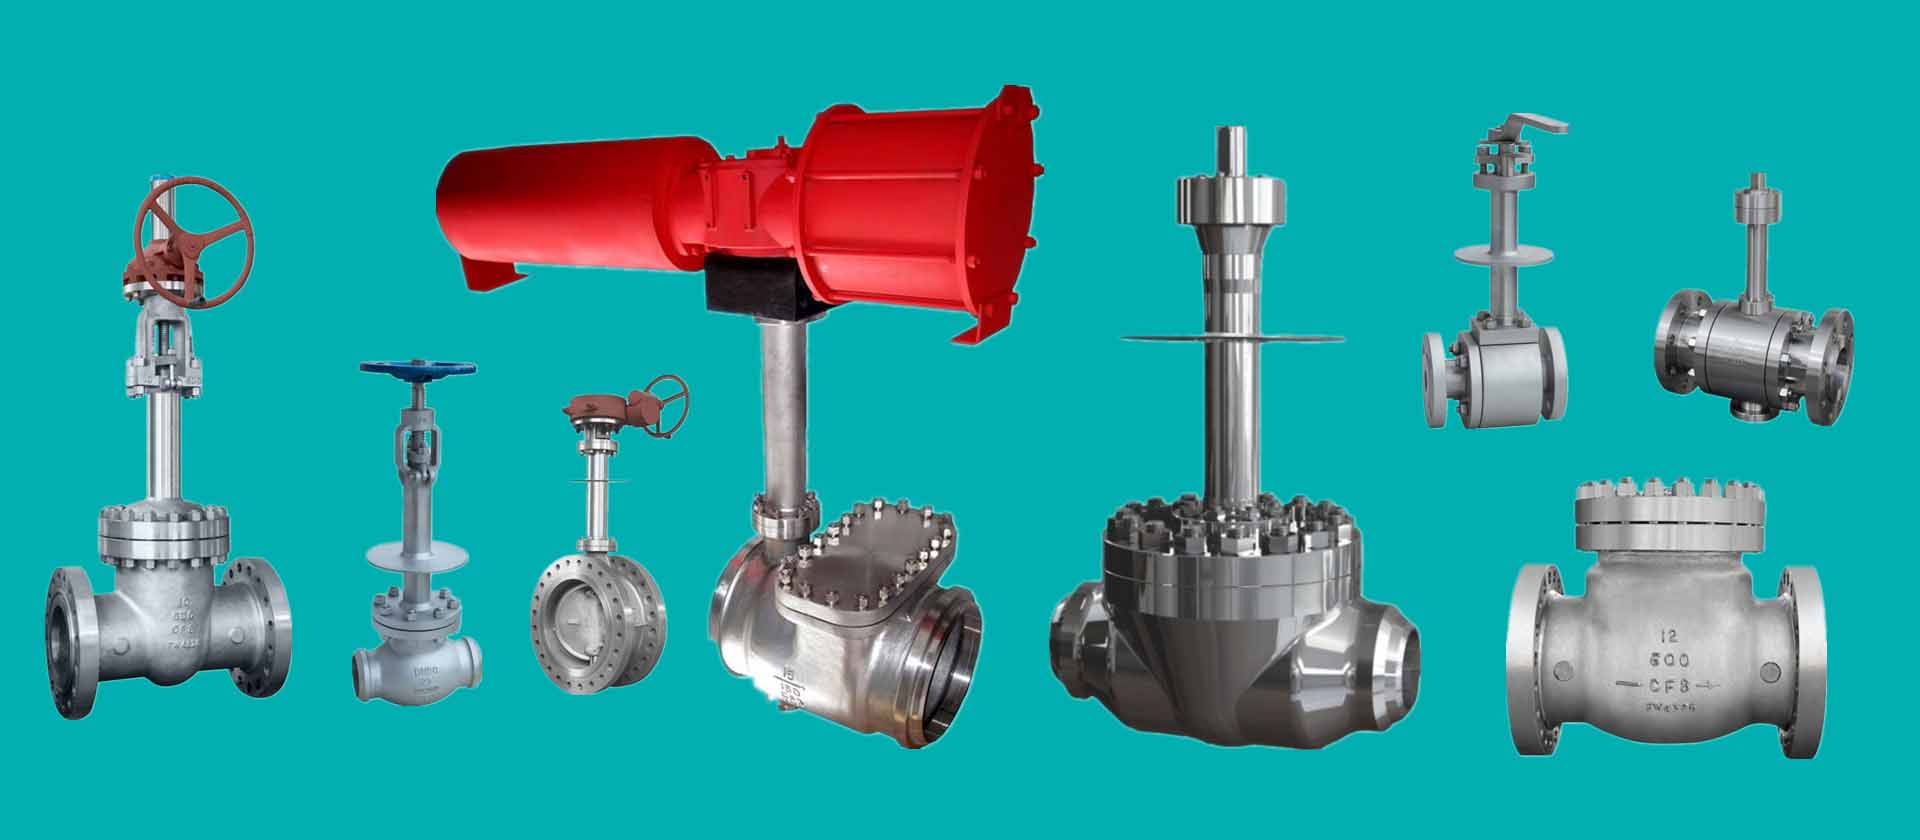 Cryogenic Valves for low temperature medium like LNG